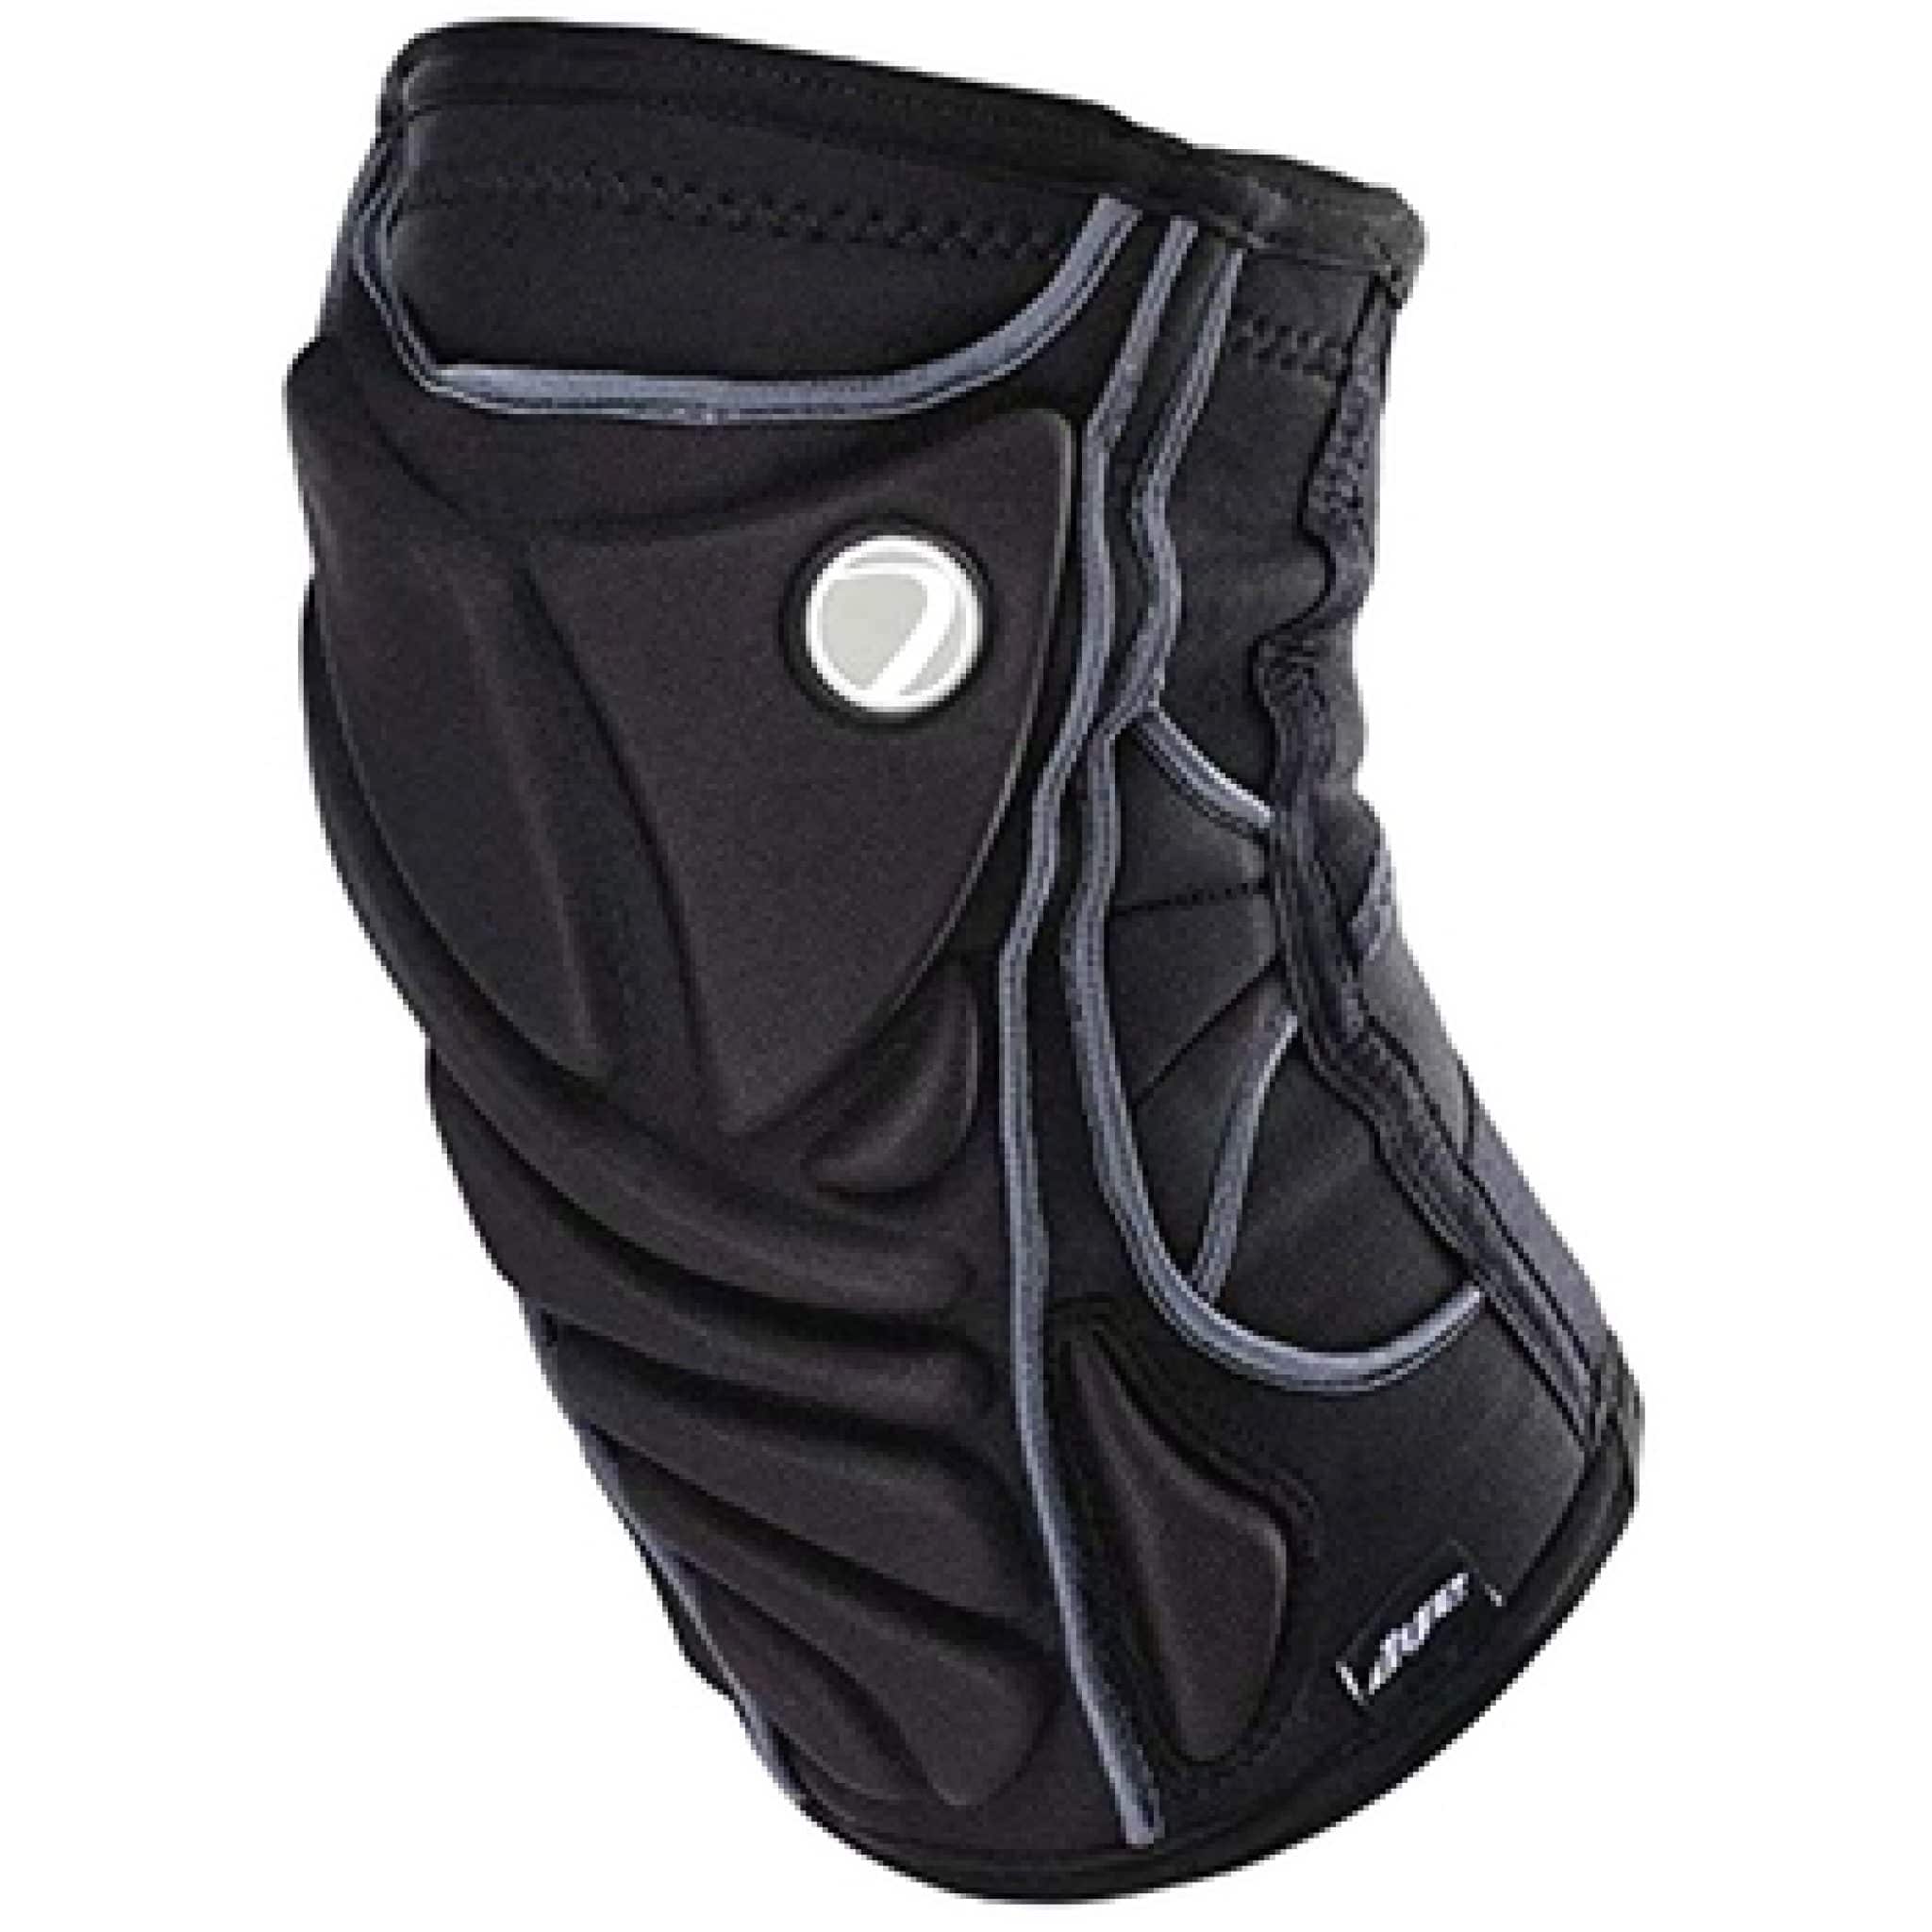 6 Best Paintball Knee Pad Pairs for Superior Protection and Comfort